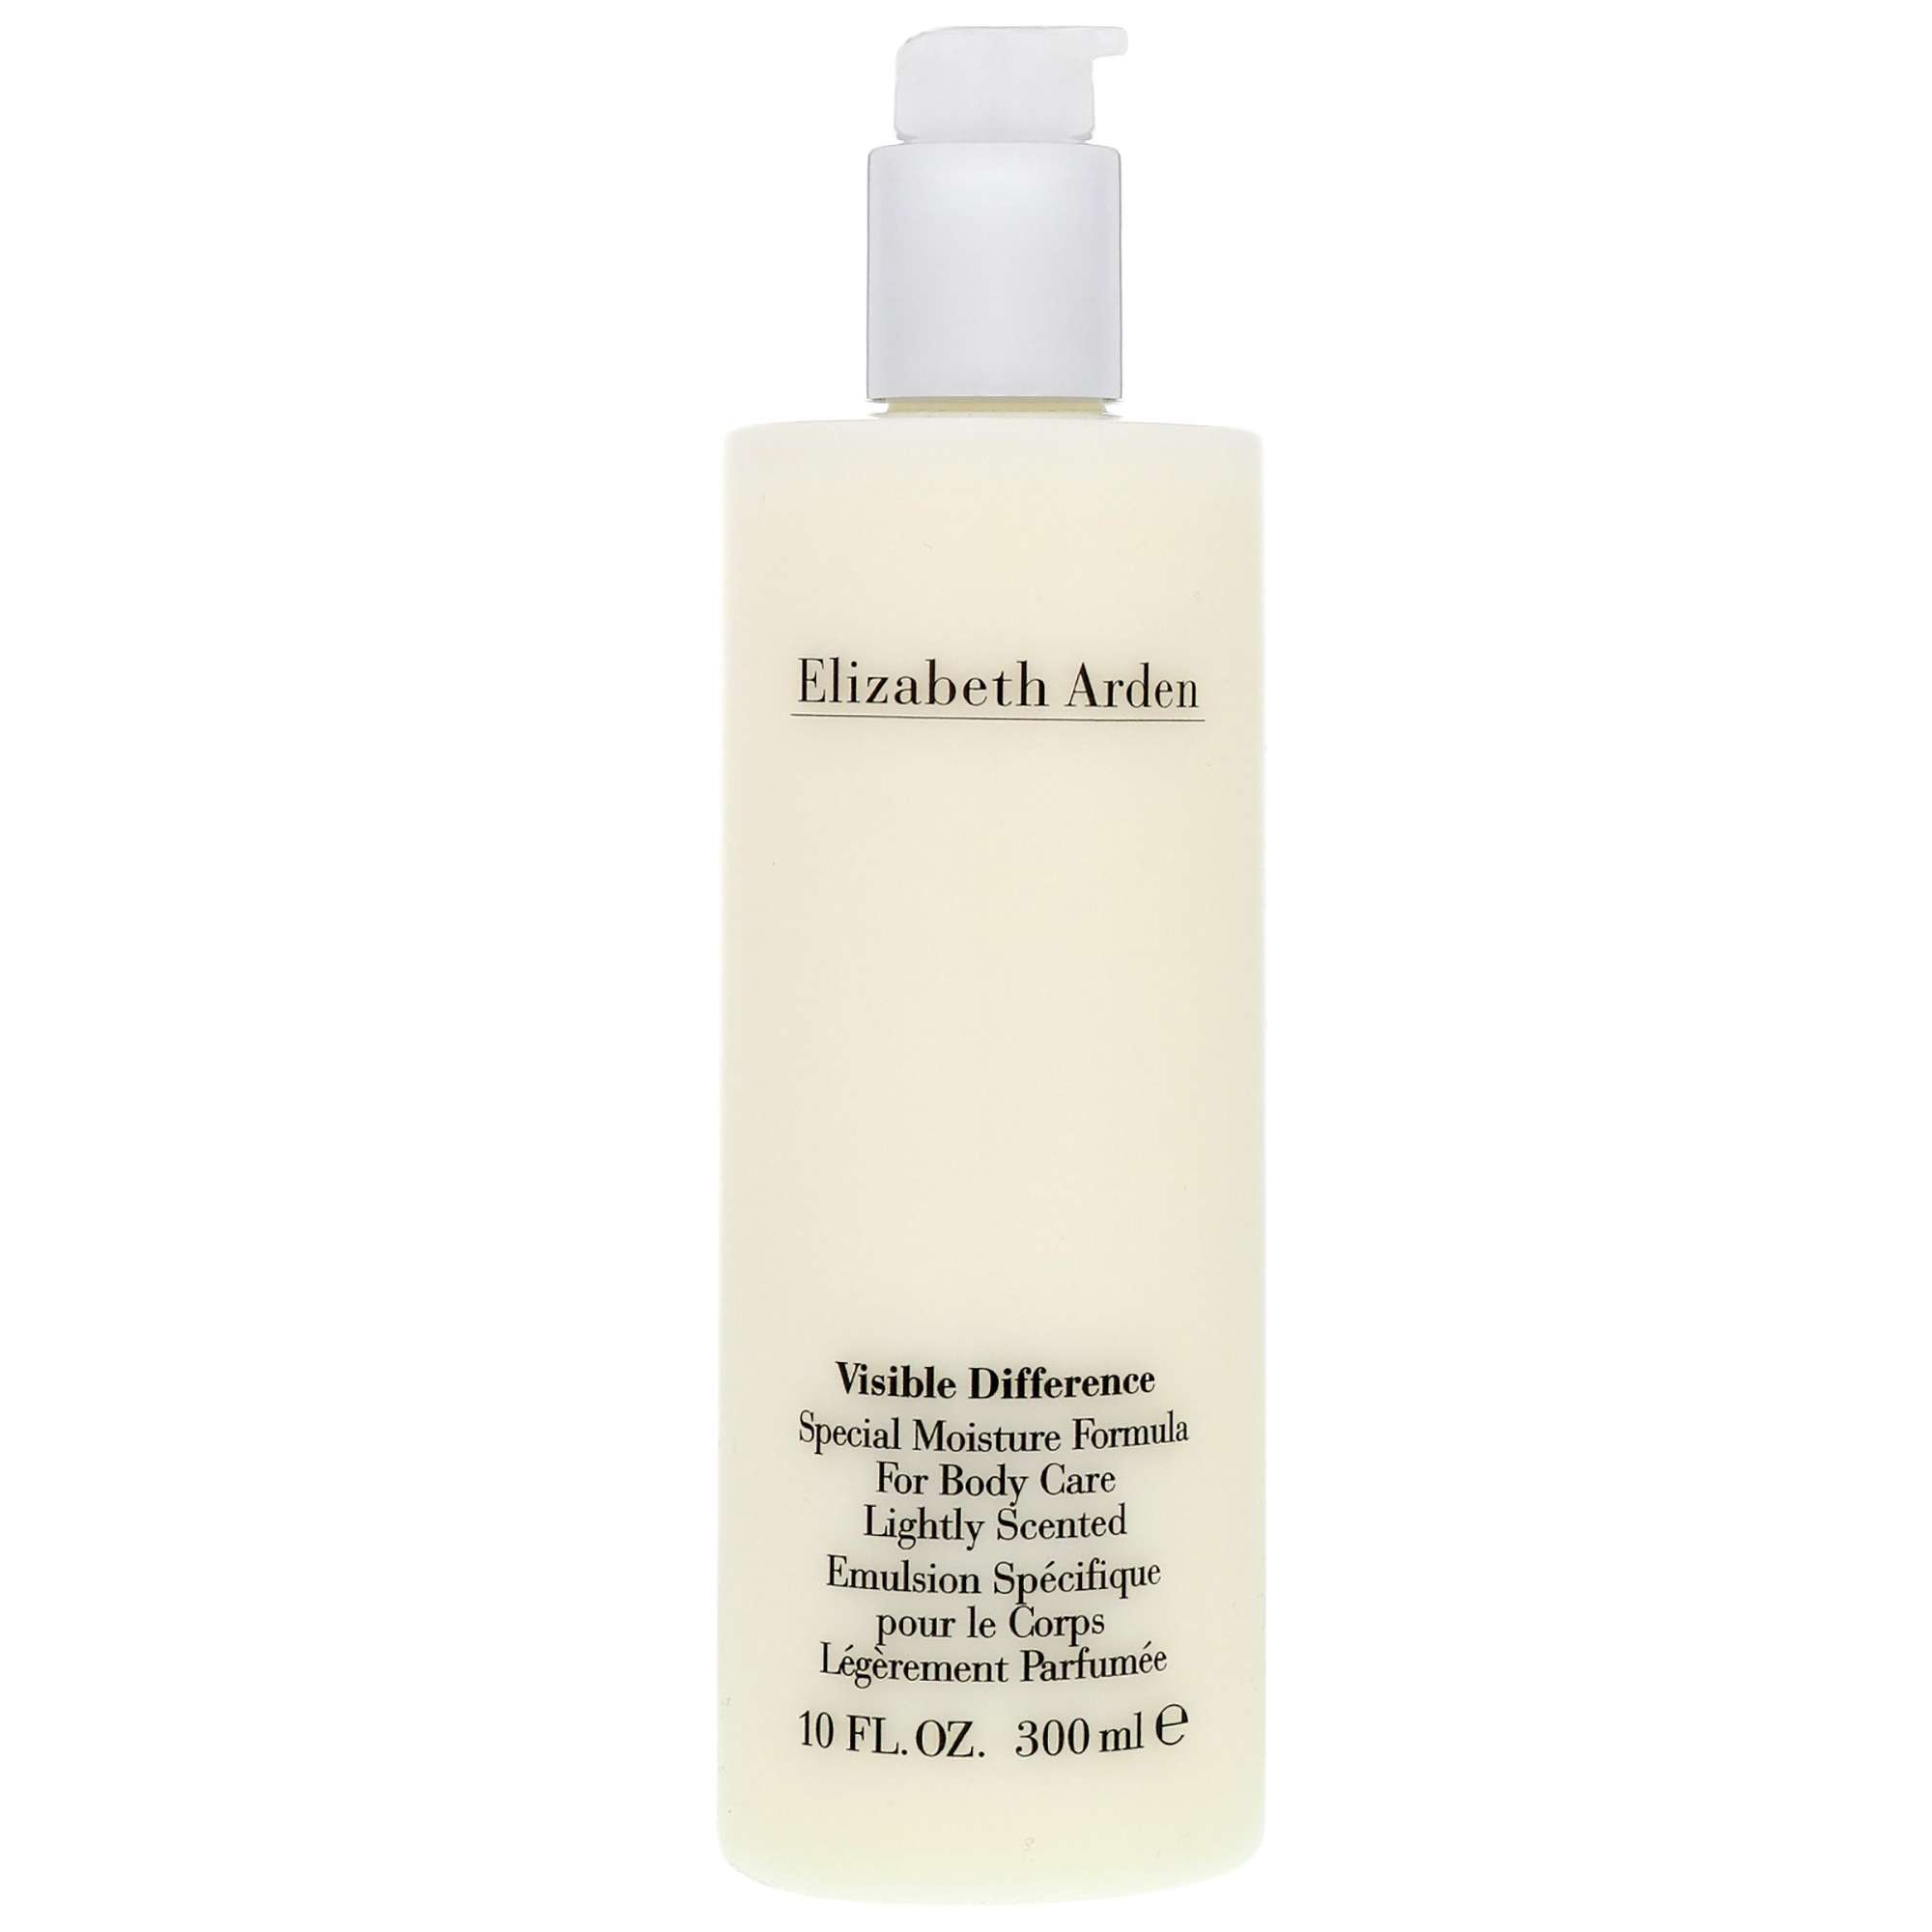 Image of Elizabeth Arden Body Care Visible Difference Special Moisture Body Formula 300ml / 10 fl.oz.